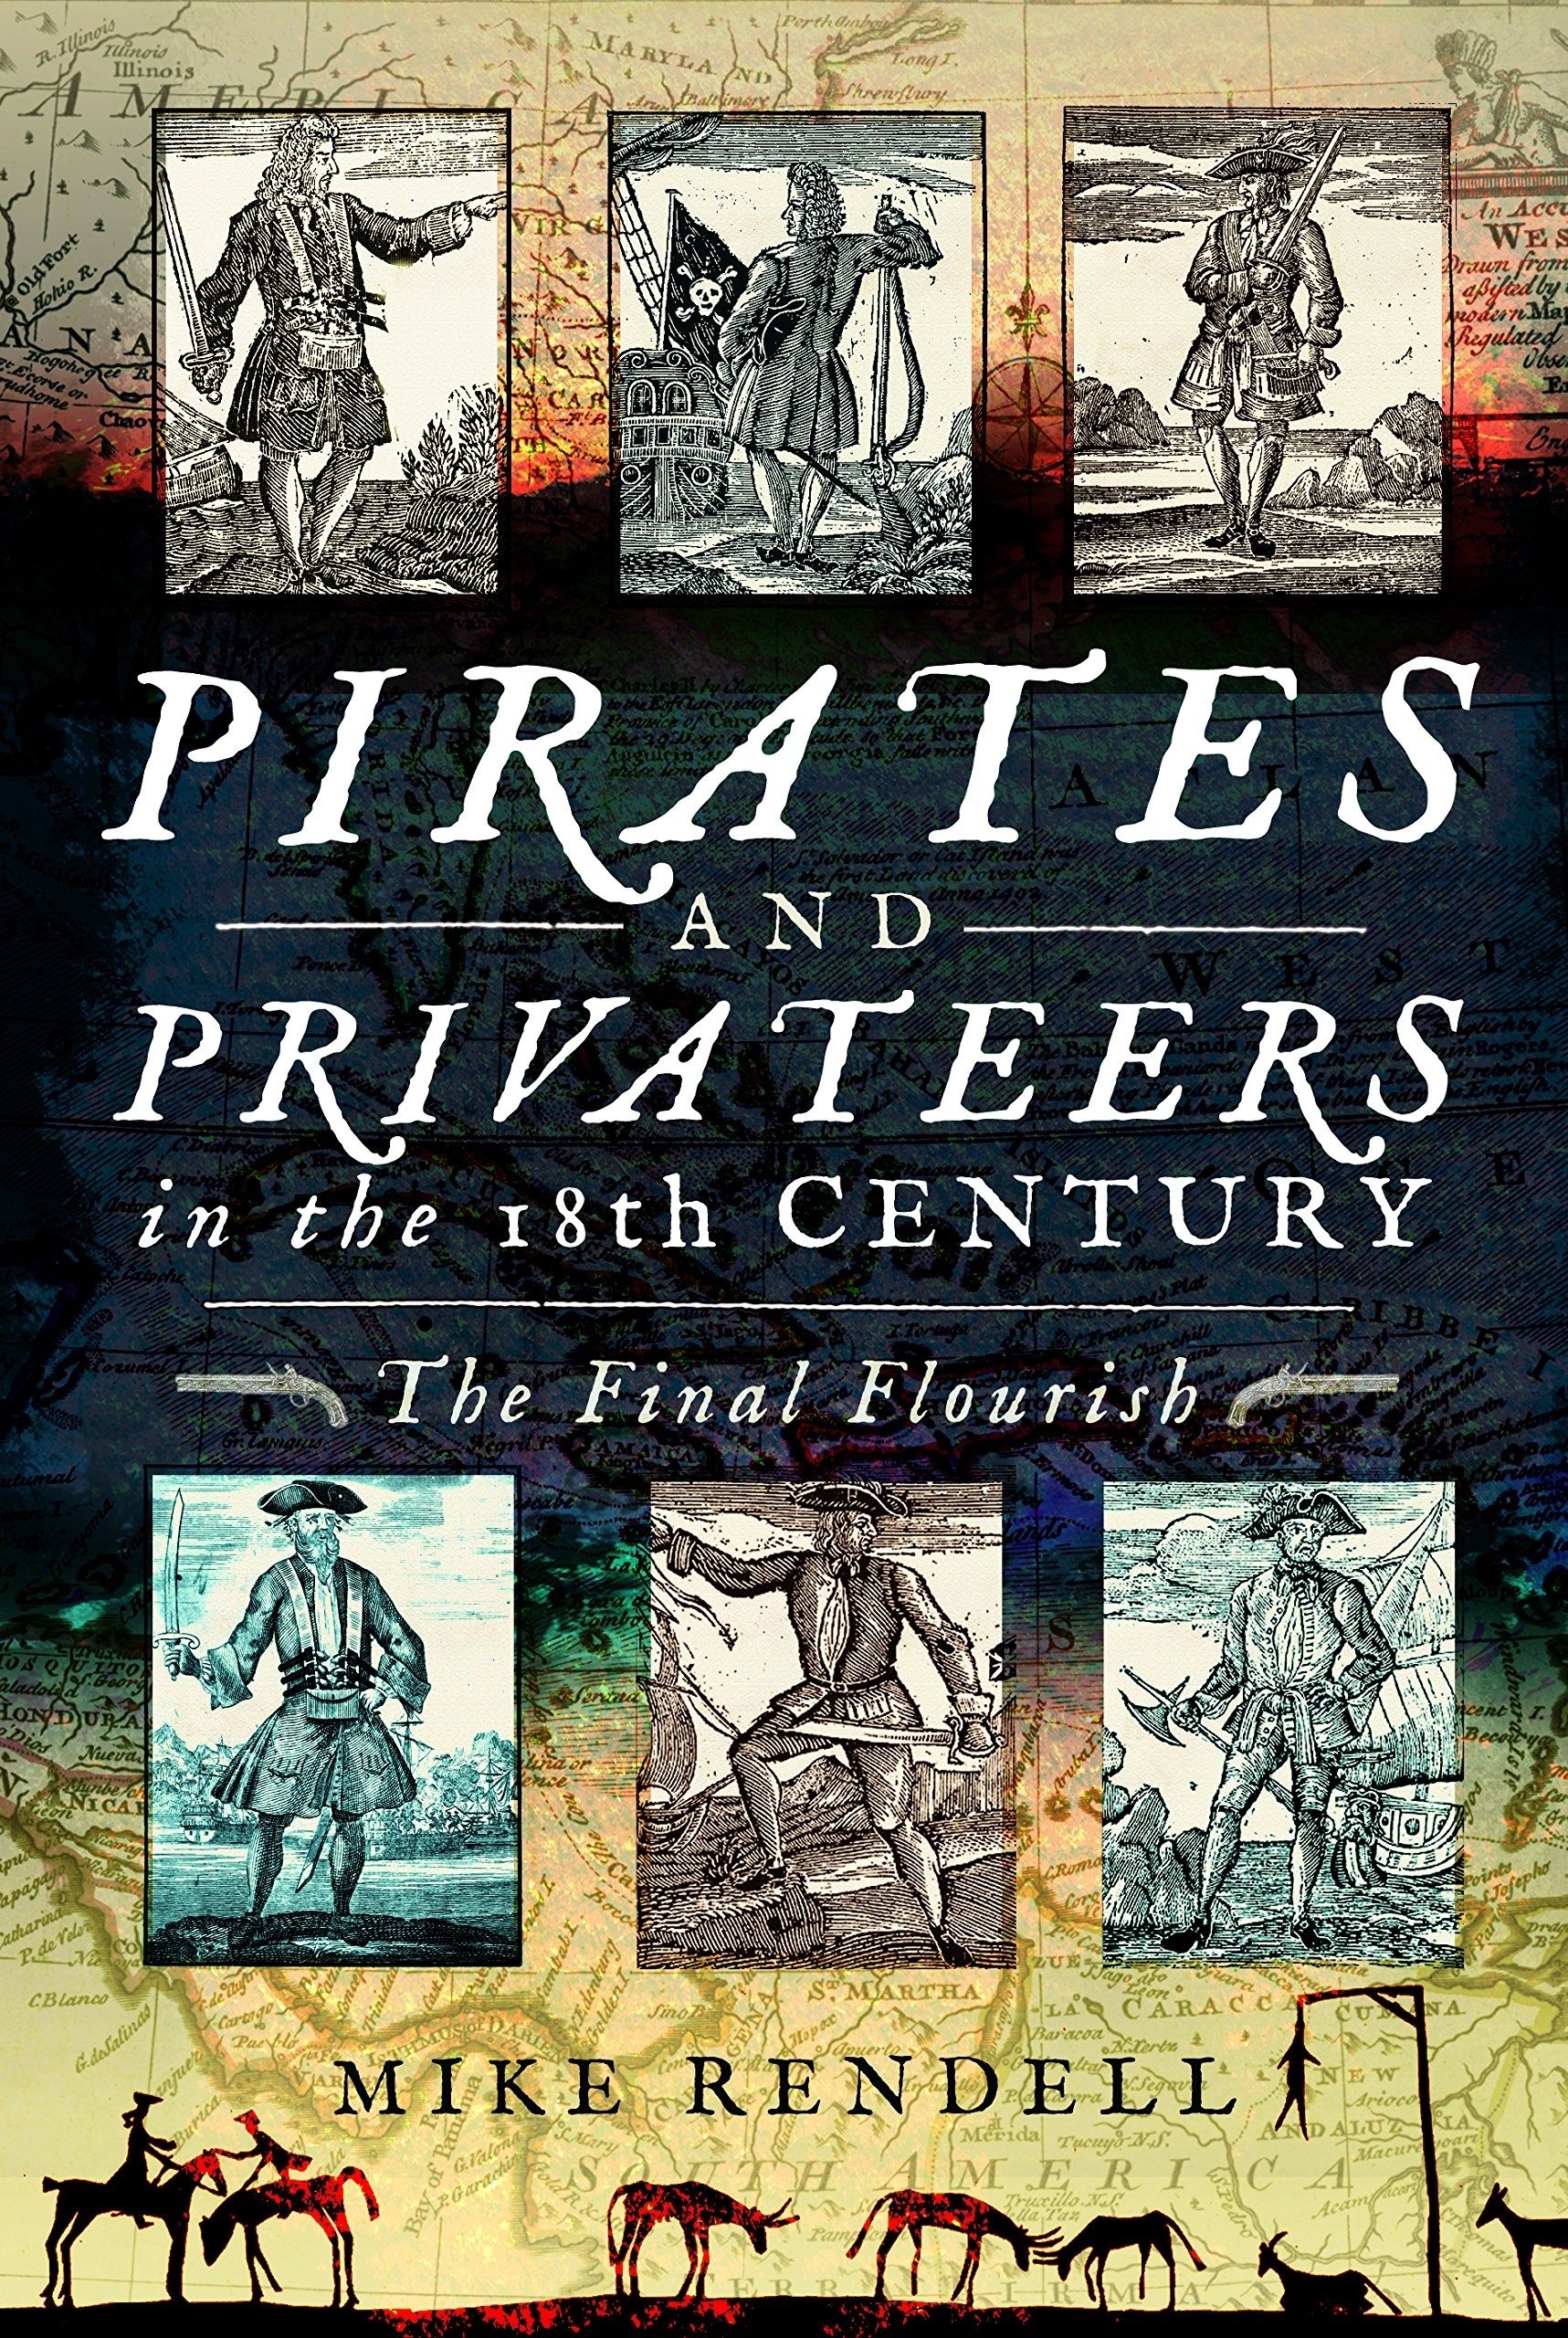 Pirates and Privateers in the 18th Century "The Final Flourish"